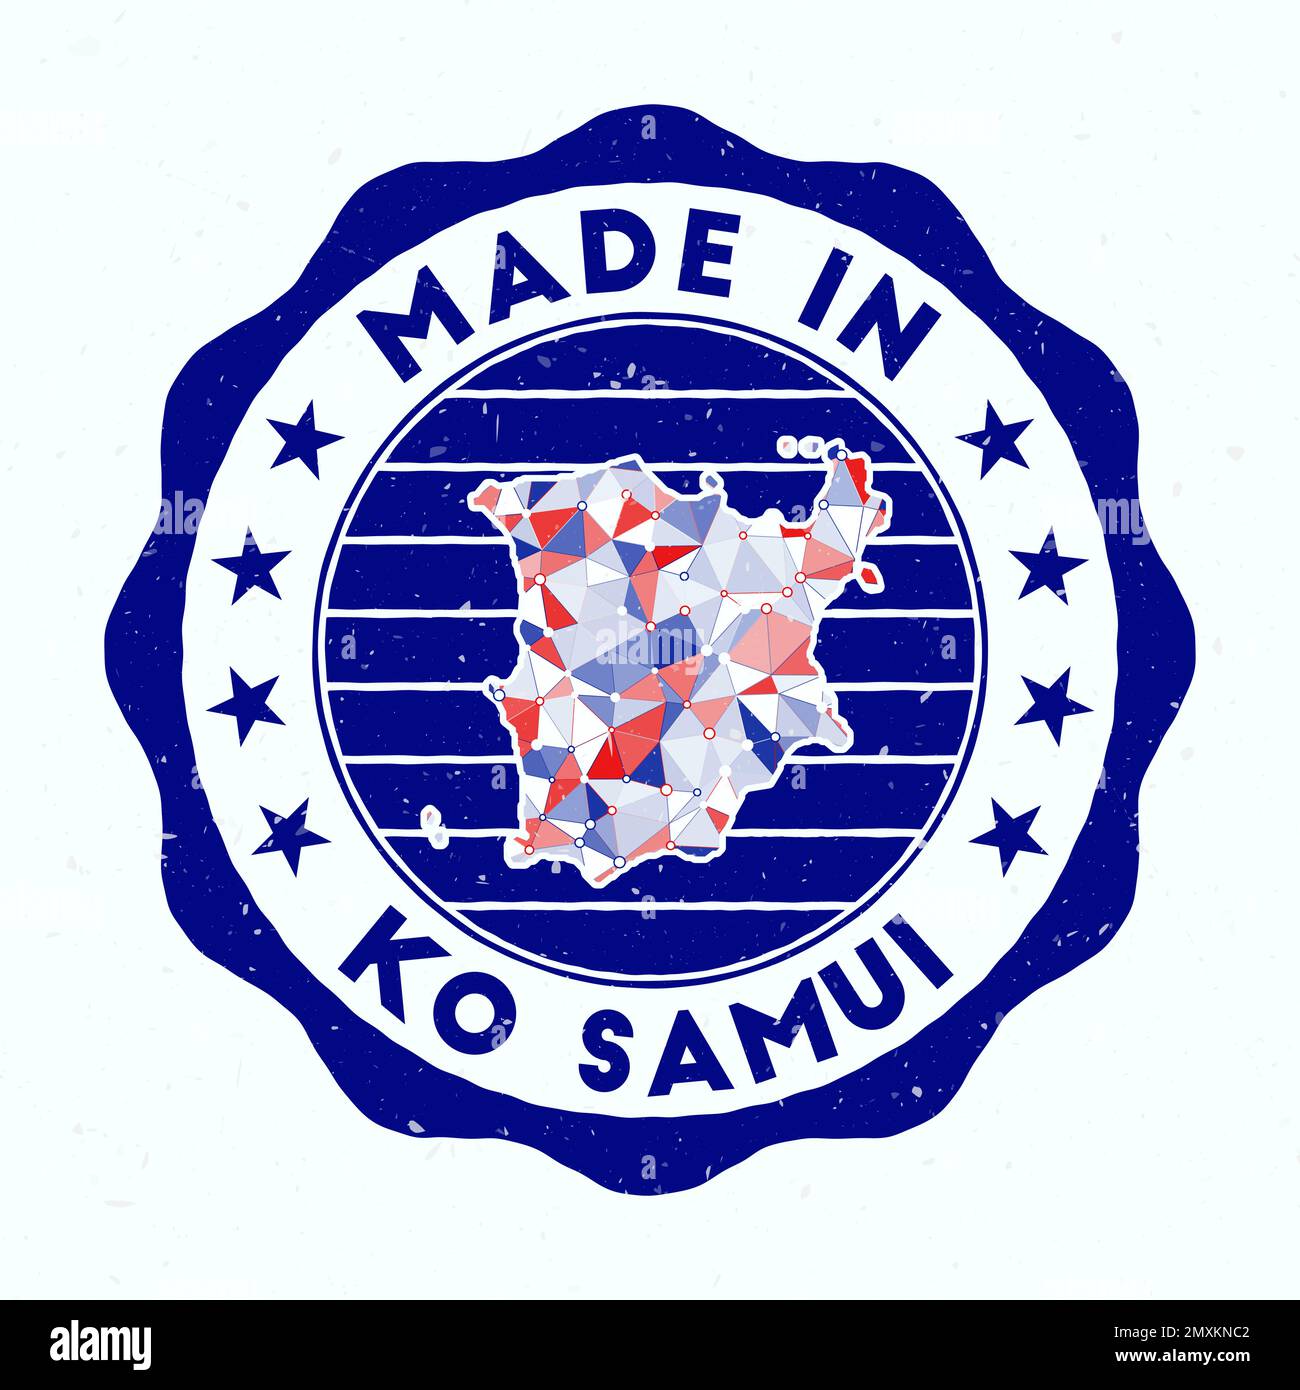 Made In Ko Samui. Island round stamp. Seal of Ko Samui with border shape. Vintage badge with circular text and stars. Vector illustration. Stock Vector